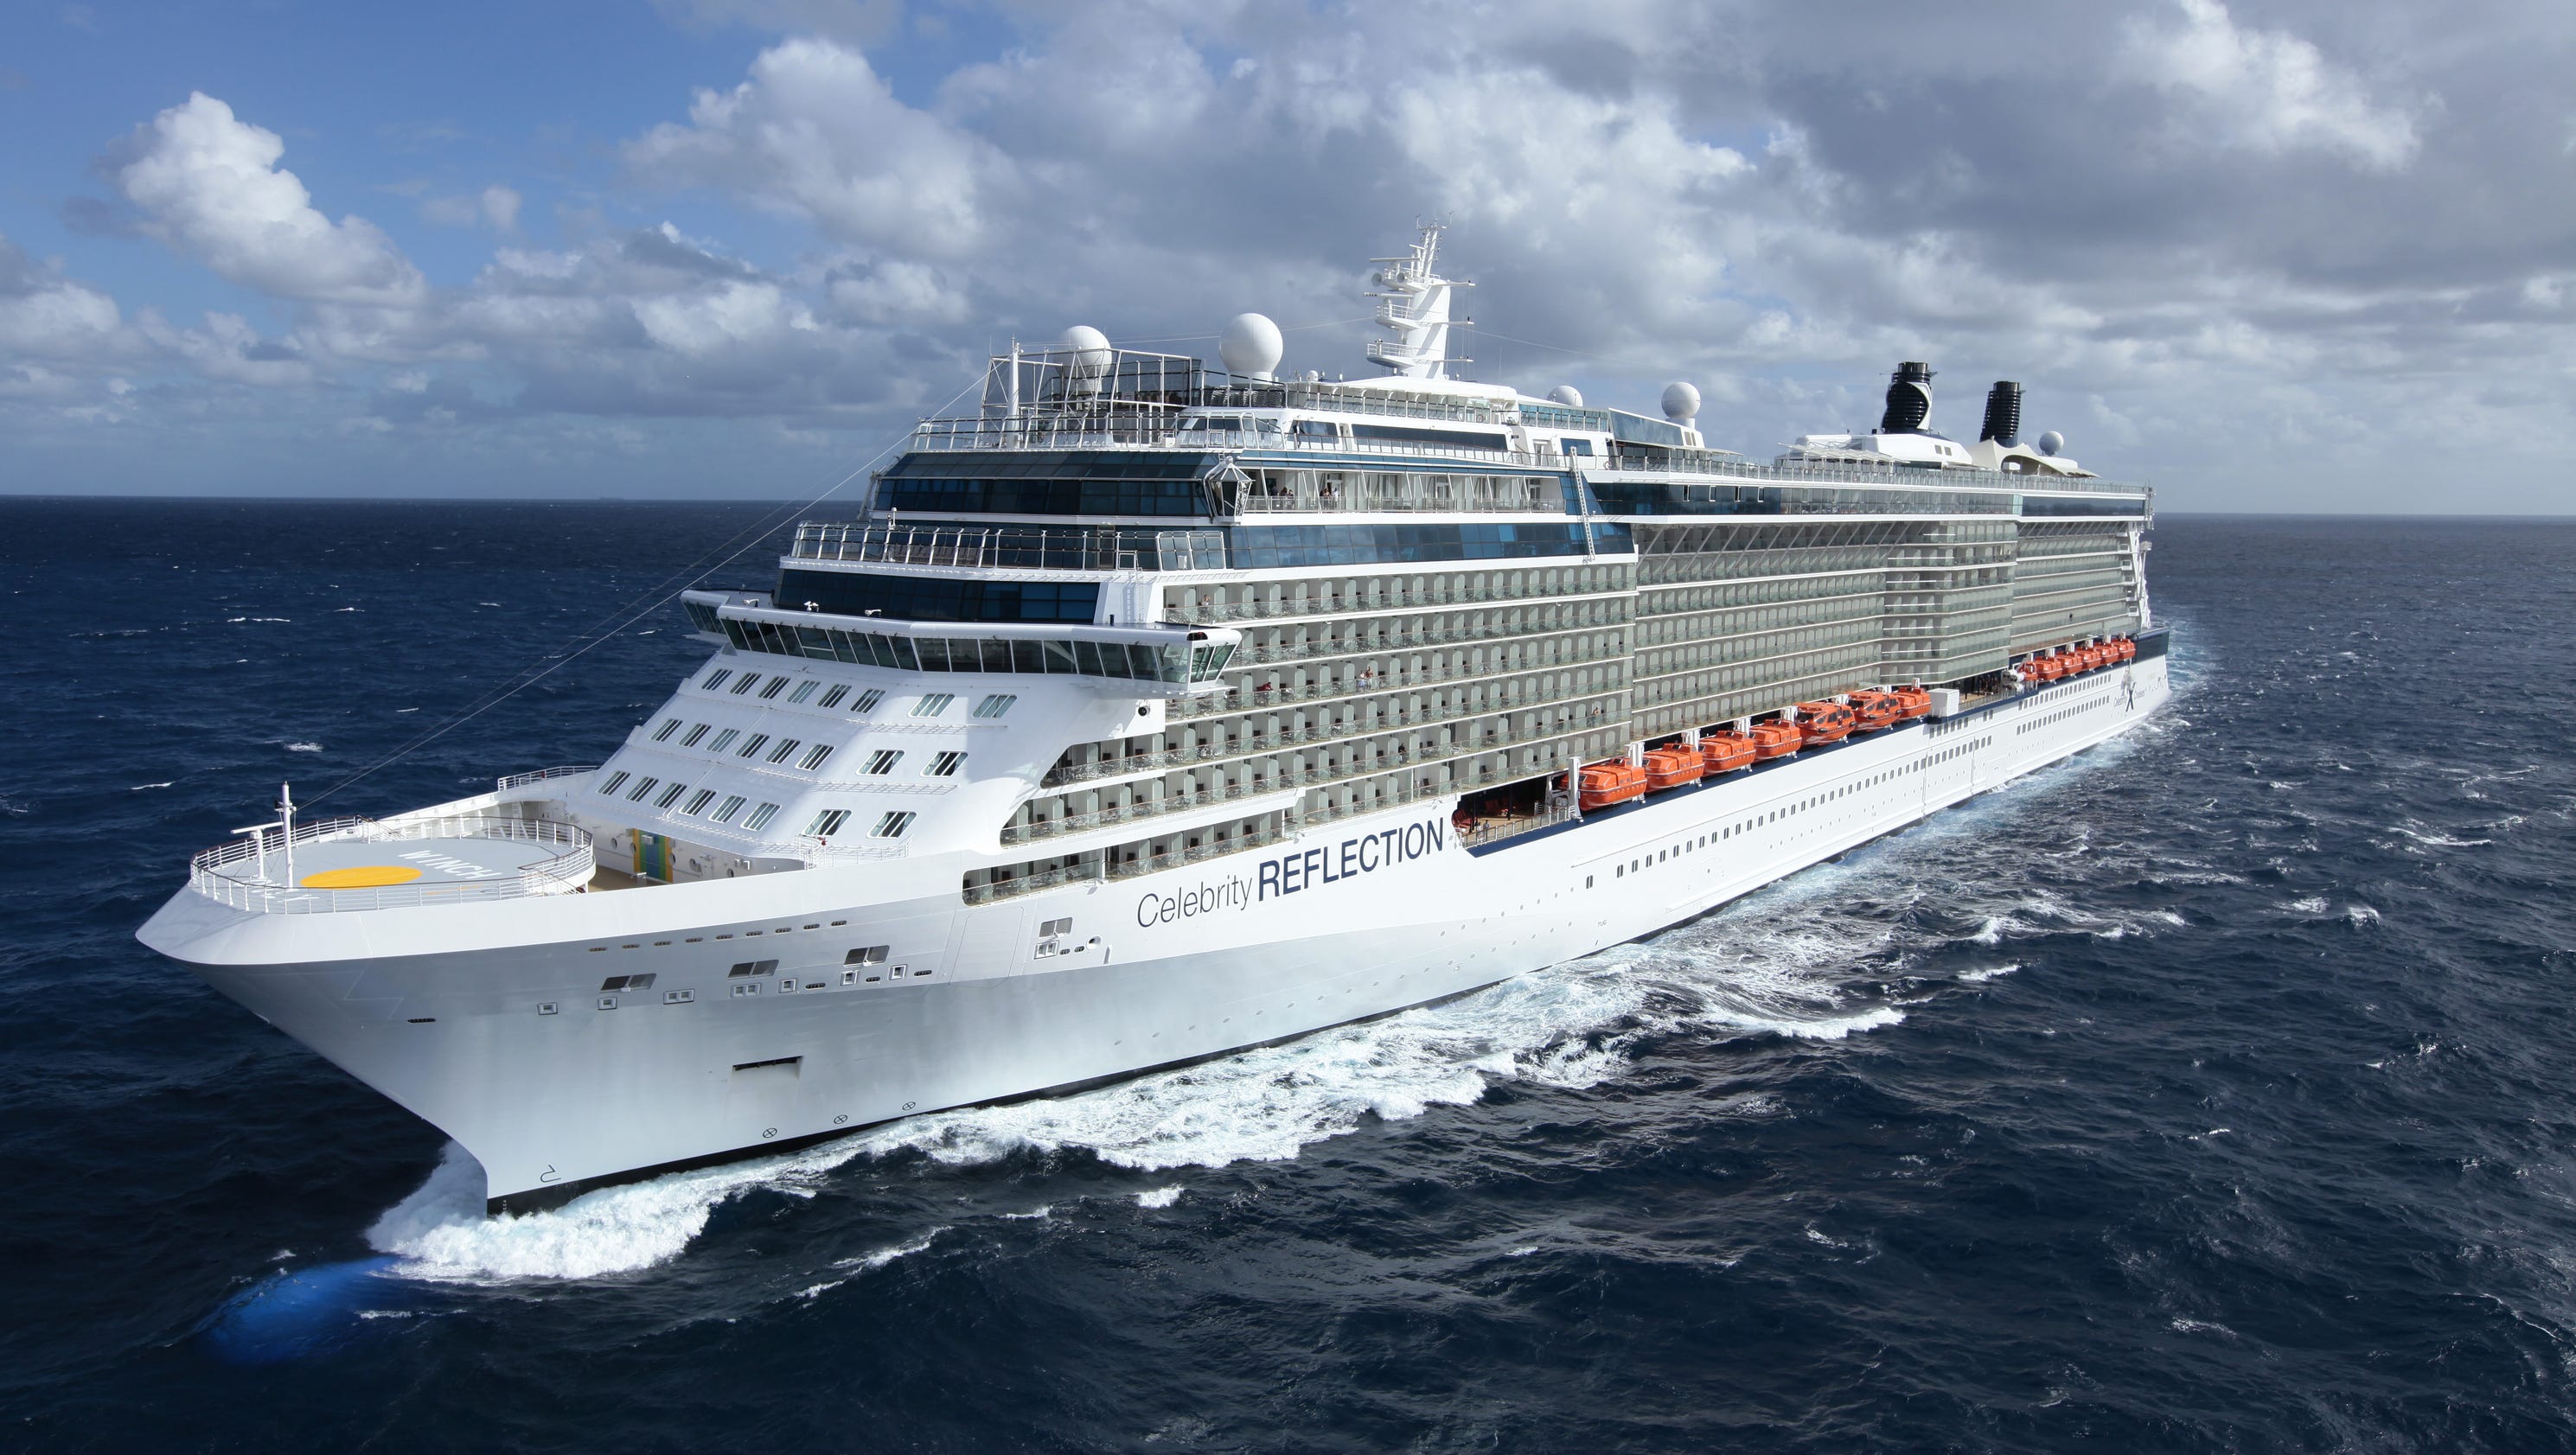 history of celebrity cruise lines